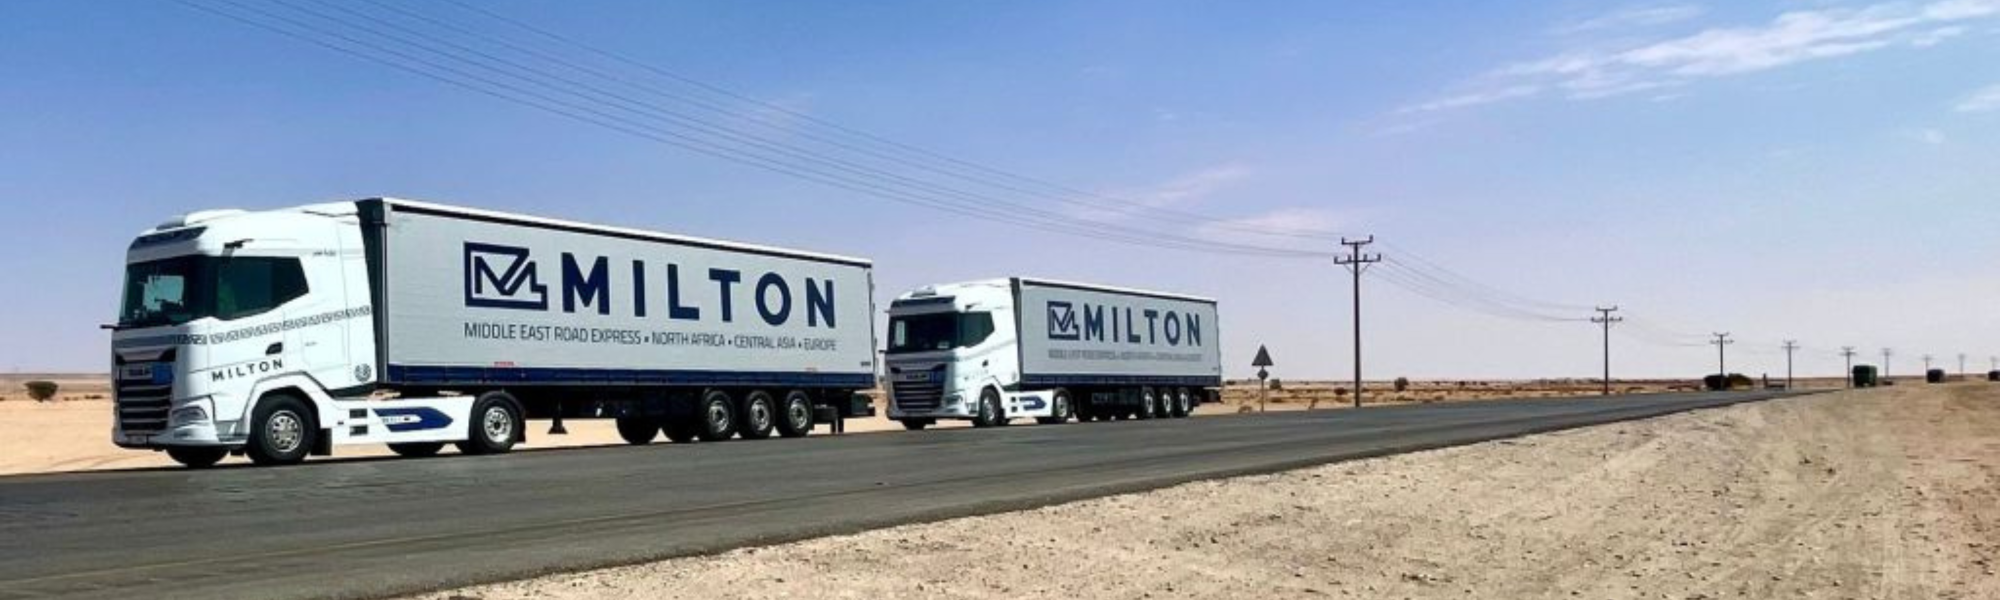 In this guest article, the Milton Group's Business Development Director, John Lucy, explains how they have mobilised the TIR system to keep goods flowing amid the Red Sea crisis.